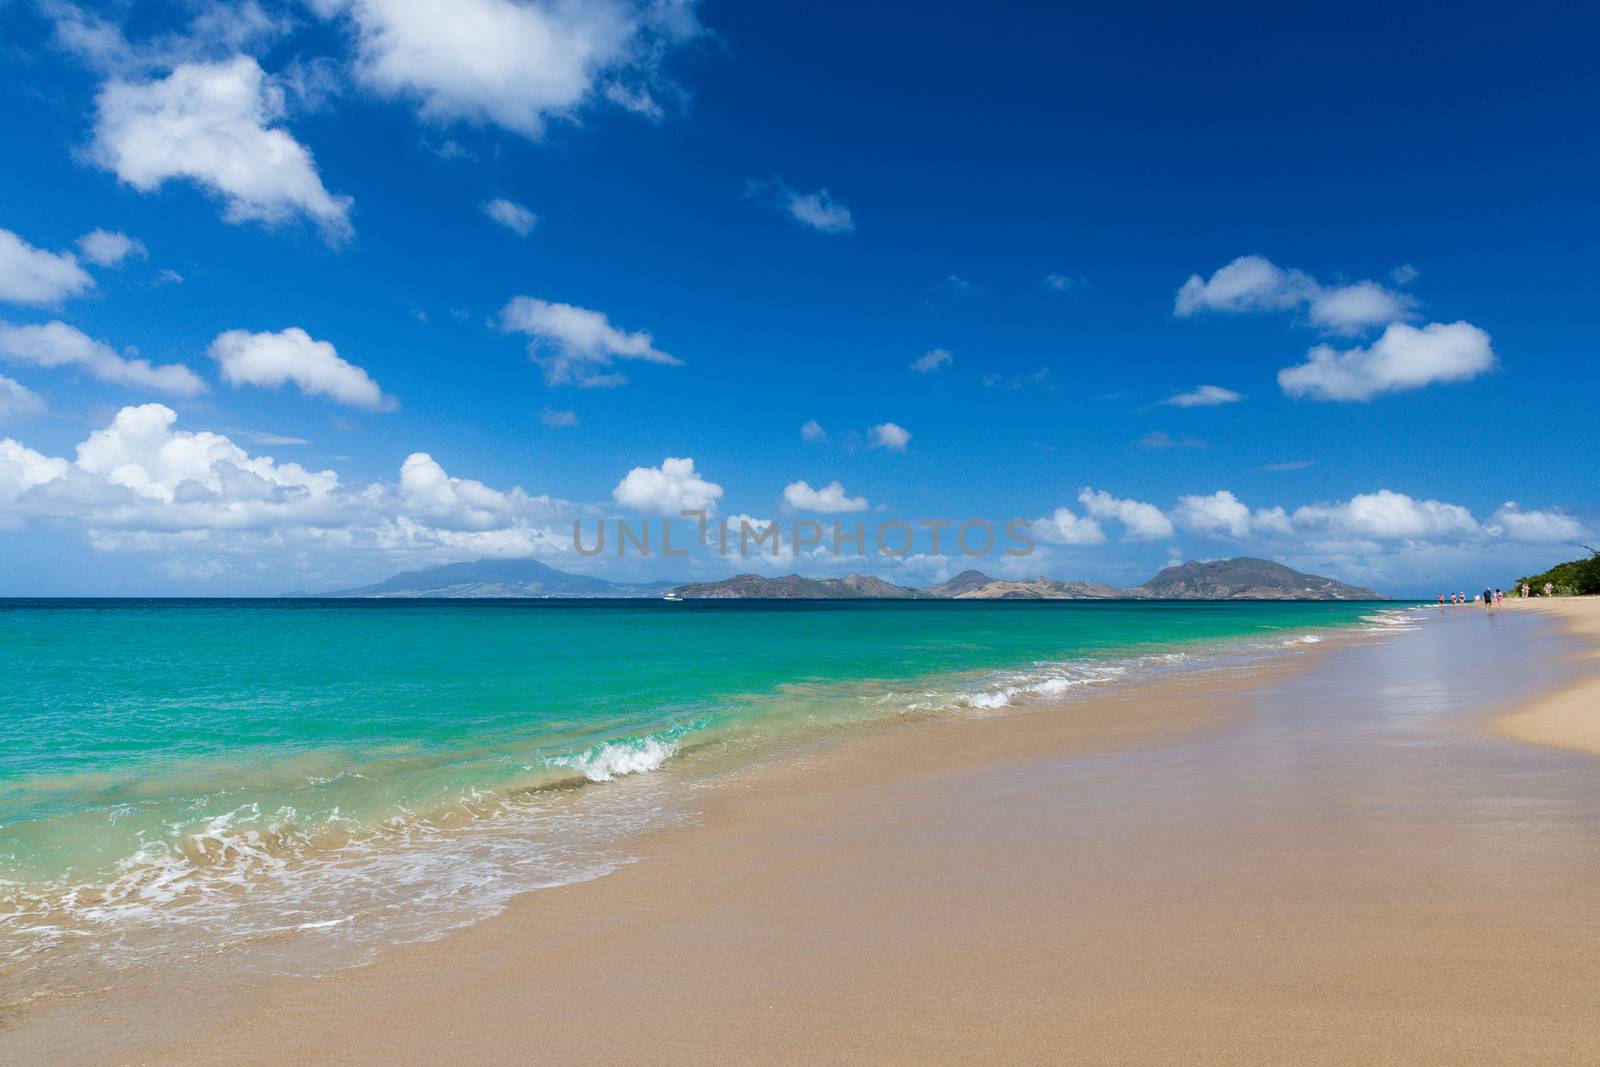 Beach view on St Nevis looking towards St Kitts by chrisukphoto